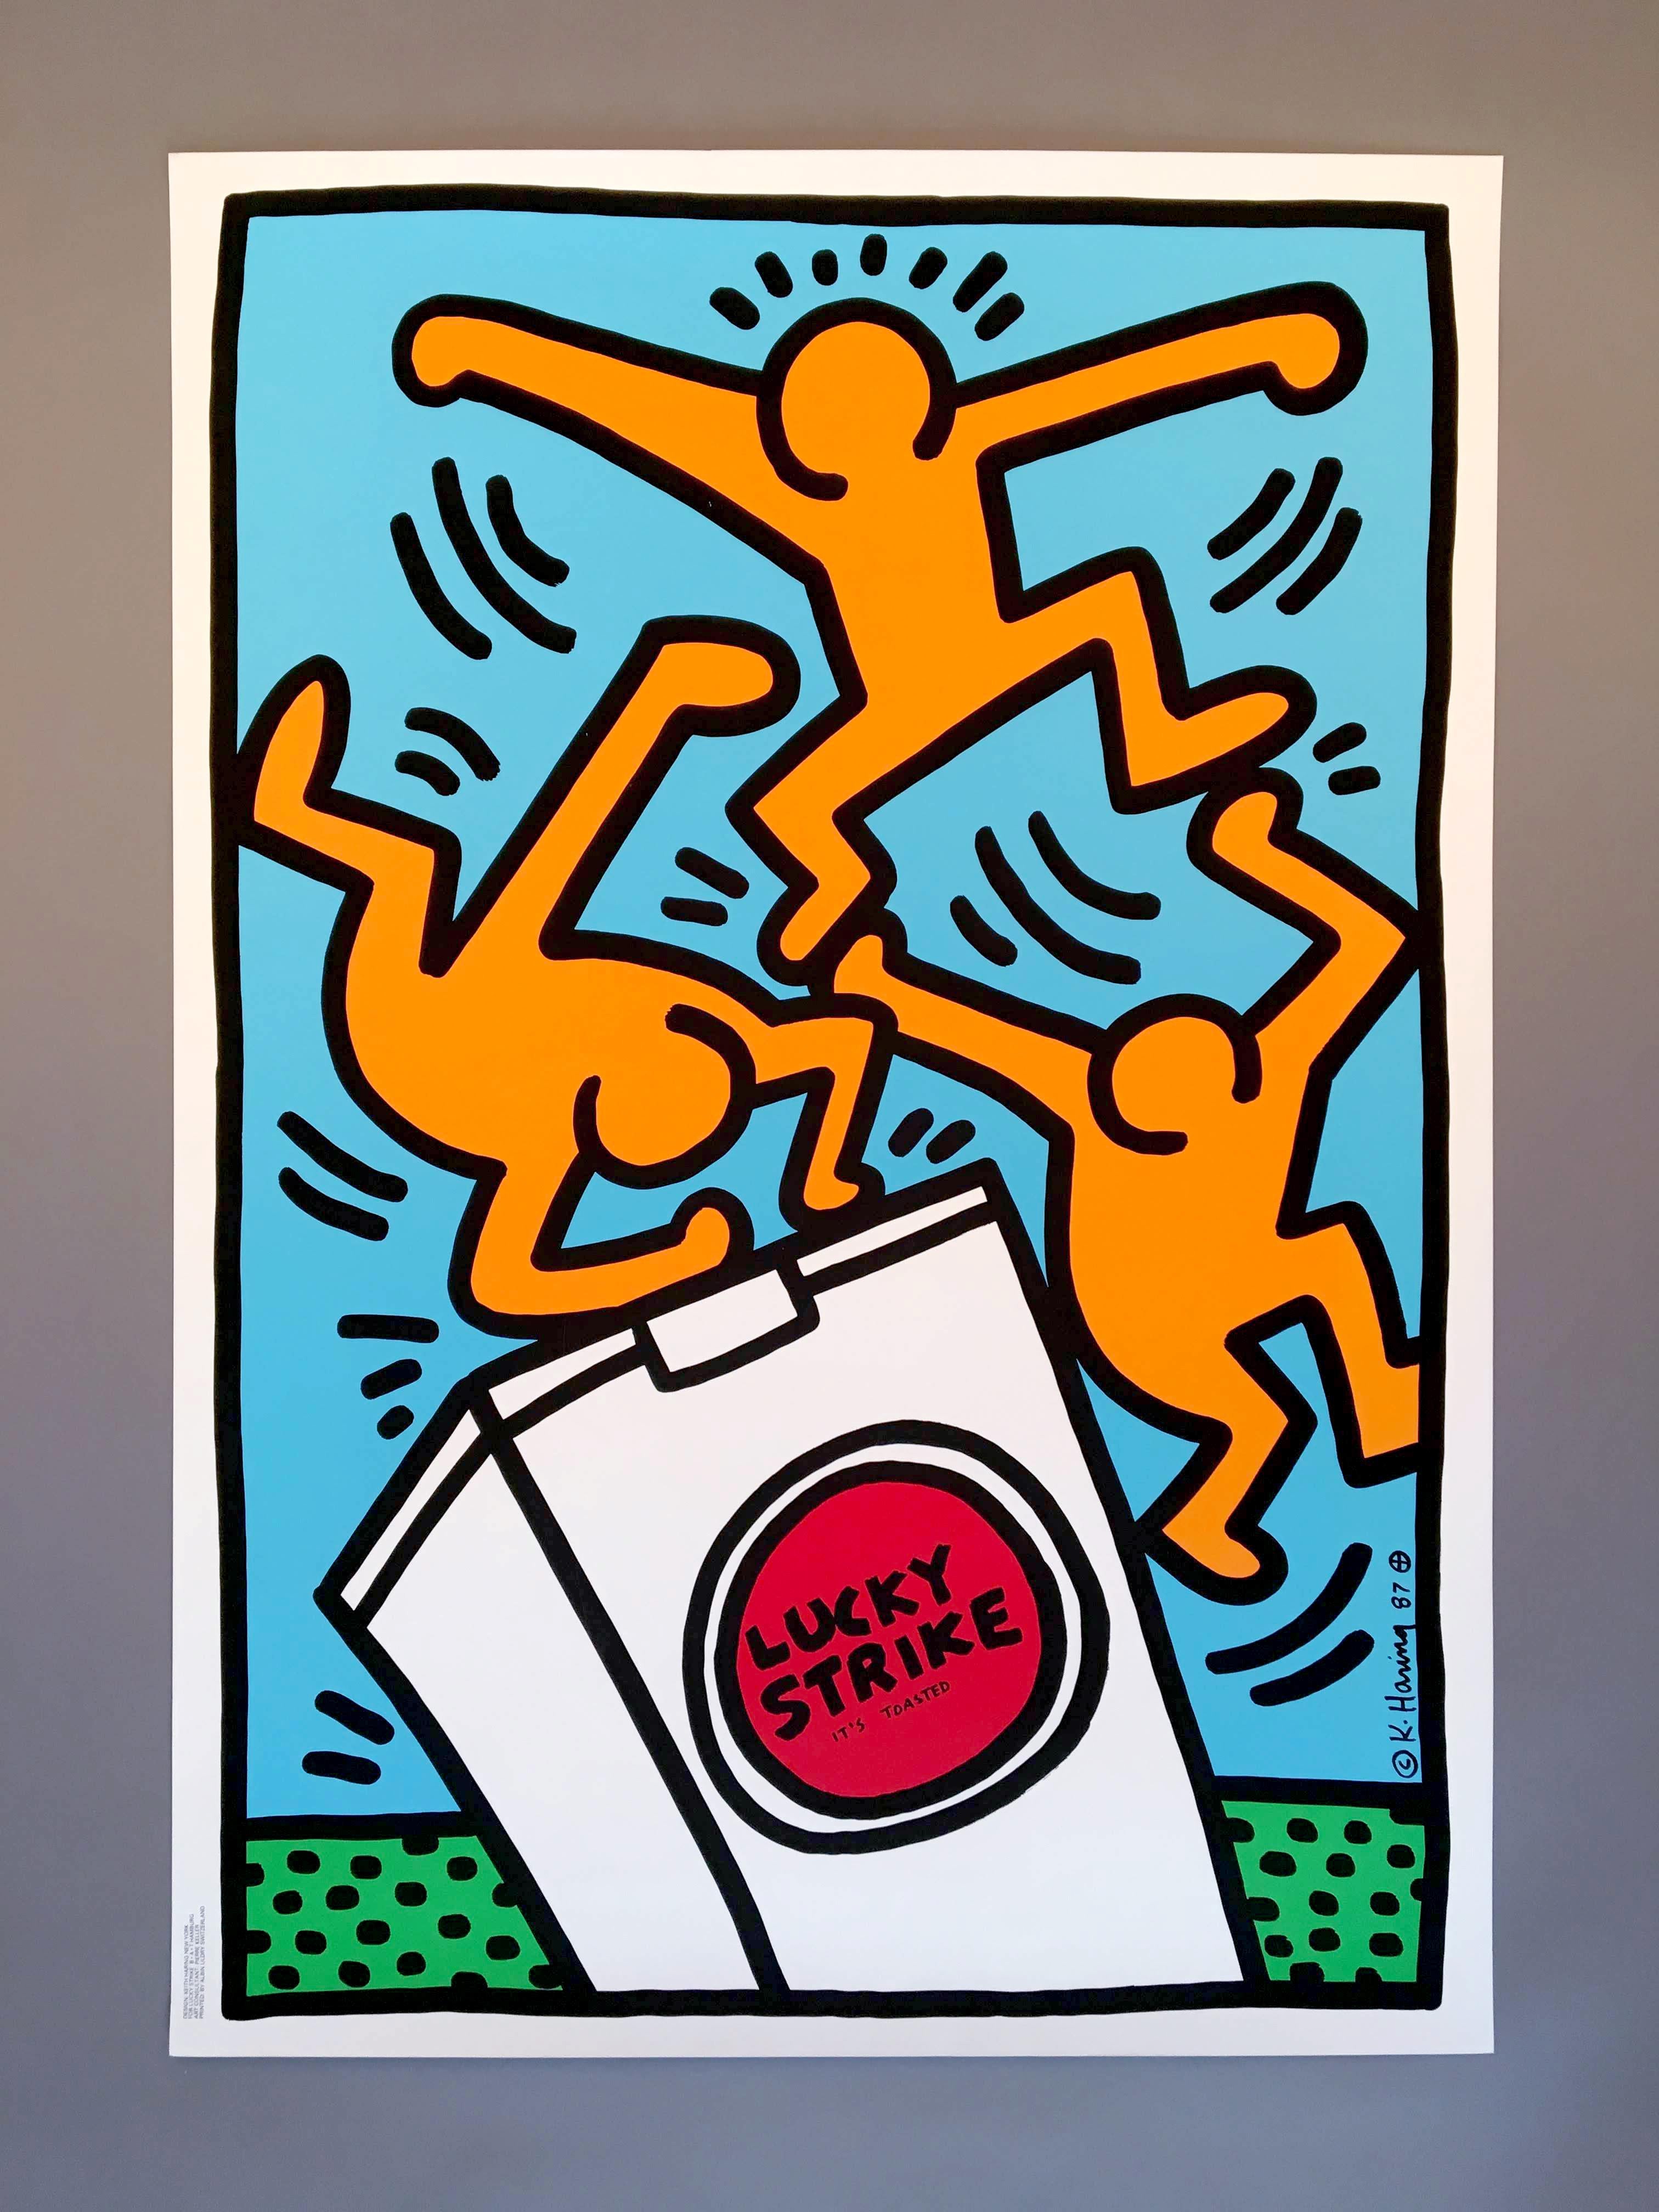 Keith Haring (United States, 1958-1990)
'Lucky Strike III', 1987
 
In 1987, the cigarette company Lucky Strike commissioned Keith Haring to design a series of advertisements for the brand. Haring created nine drawings for Lucky Strike, from which